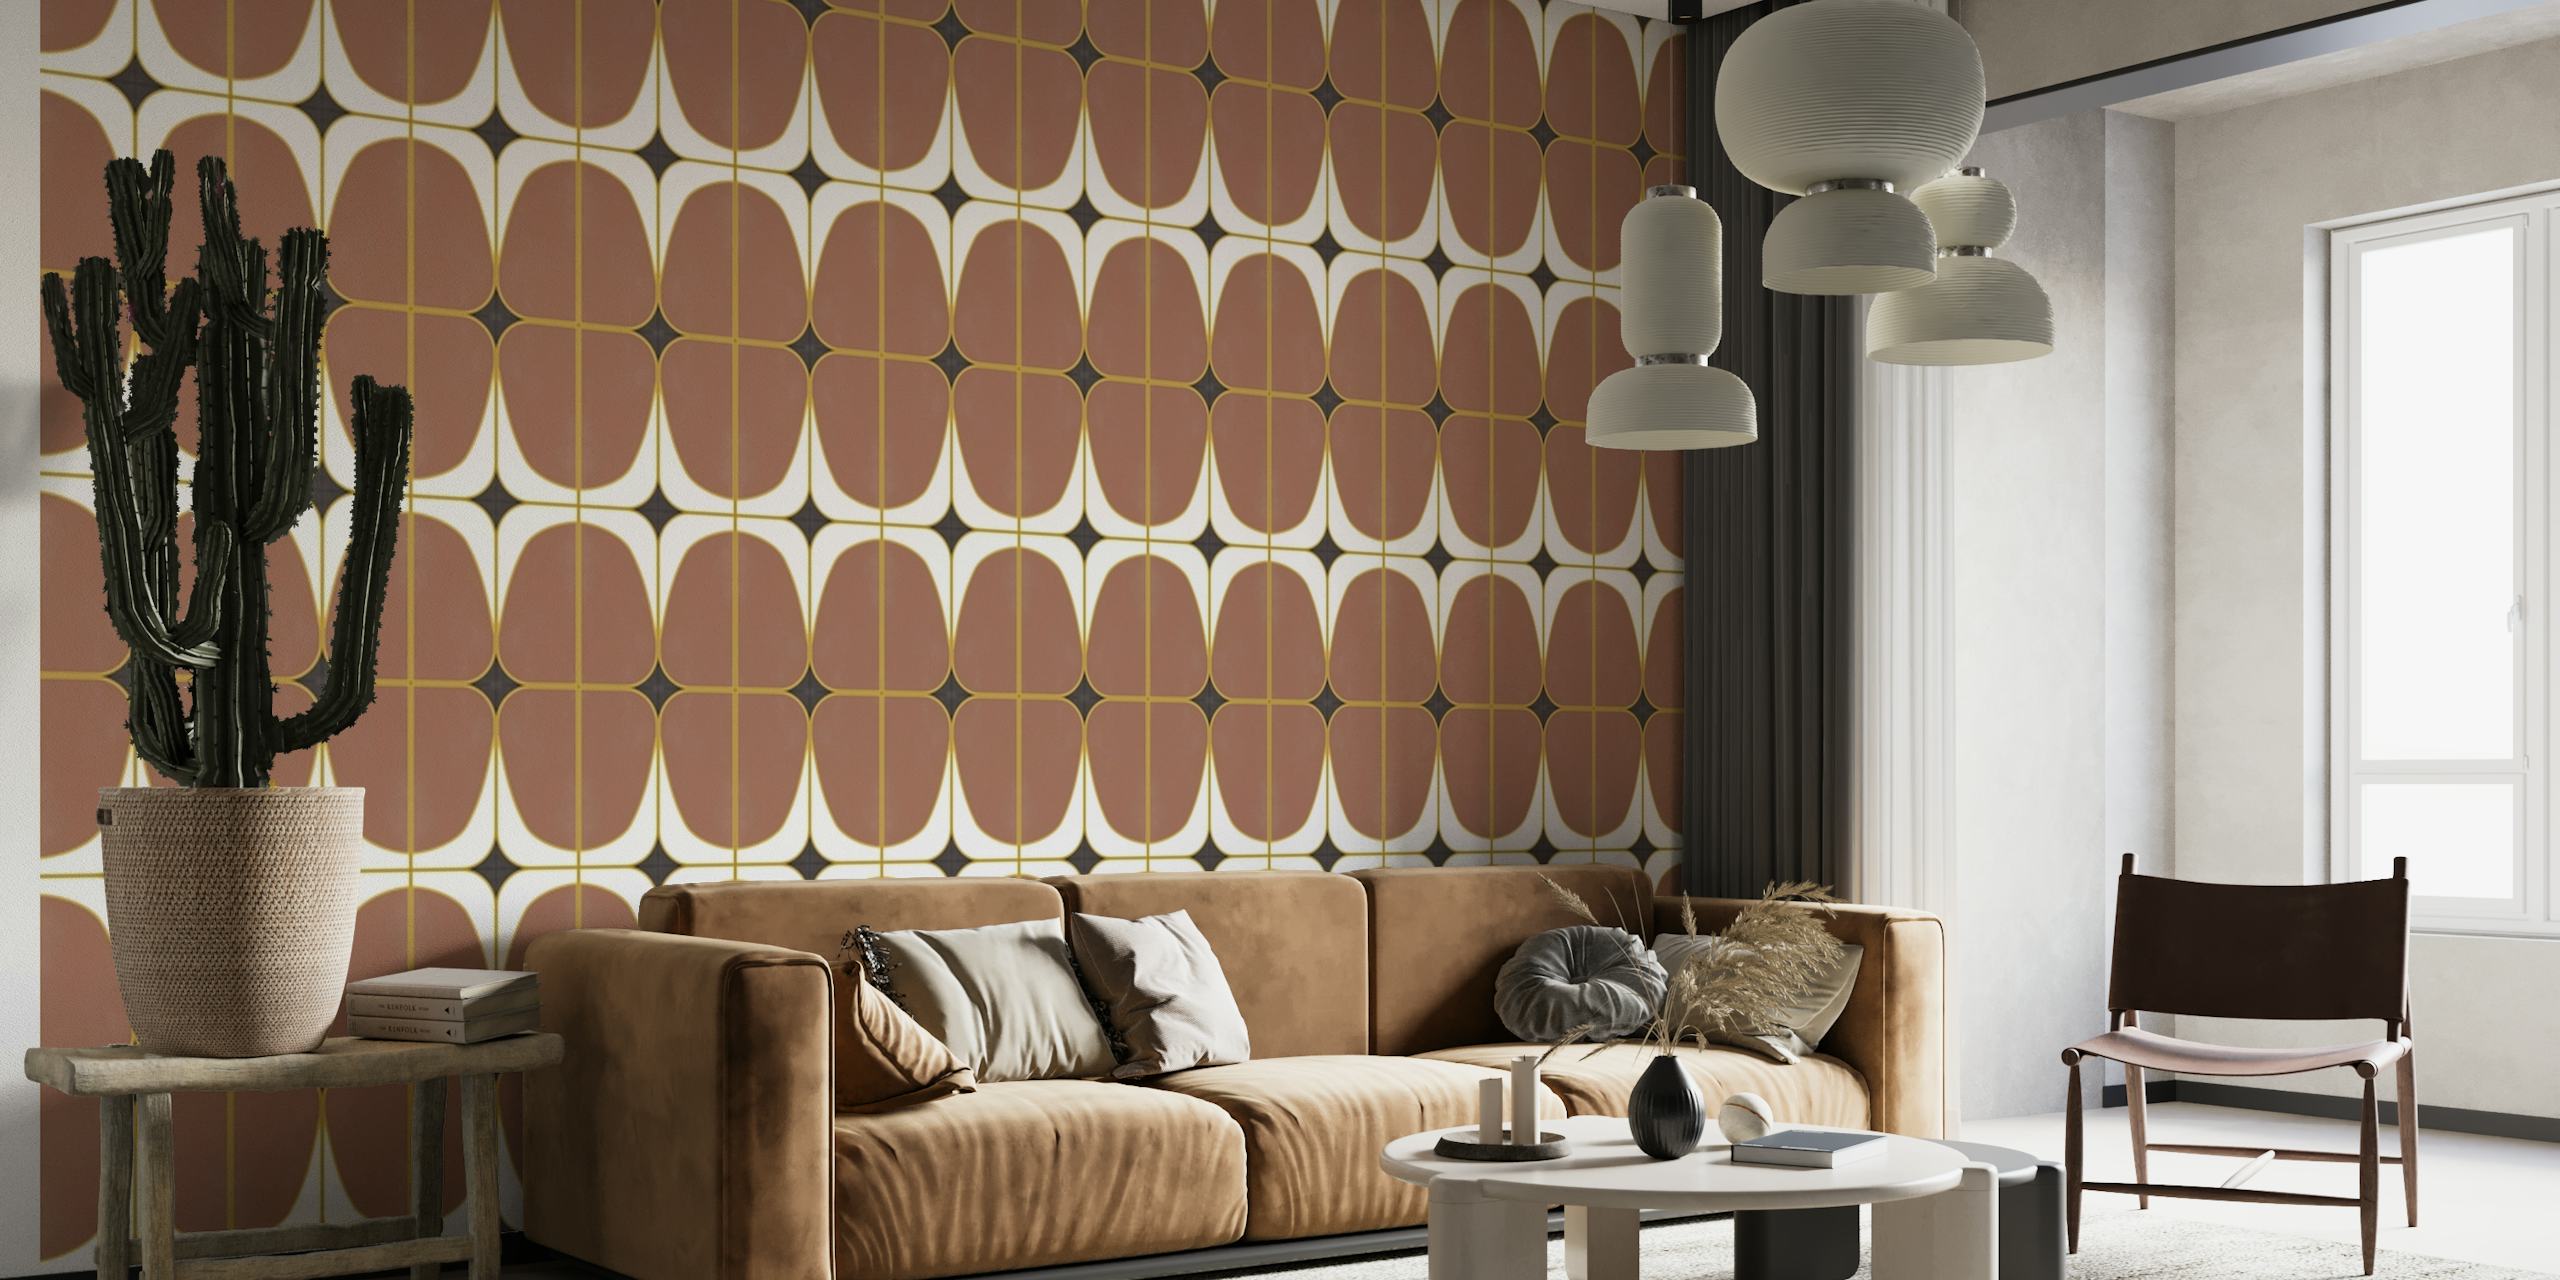 Retro seventies-style tile pattern wall mural with earthy tones